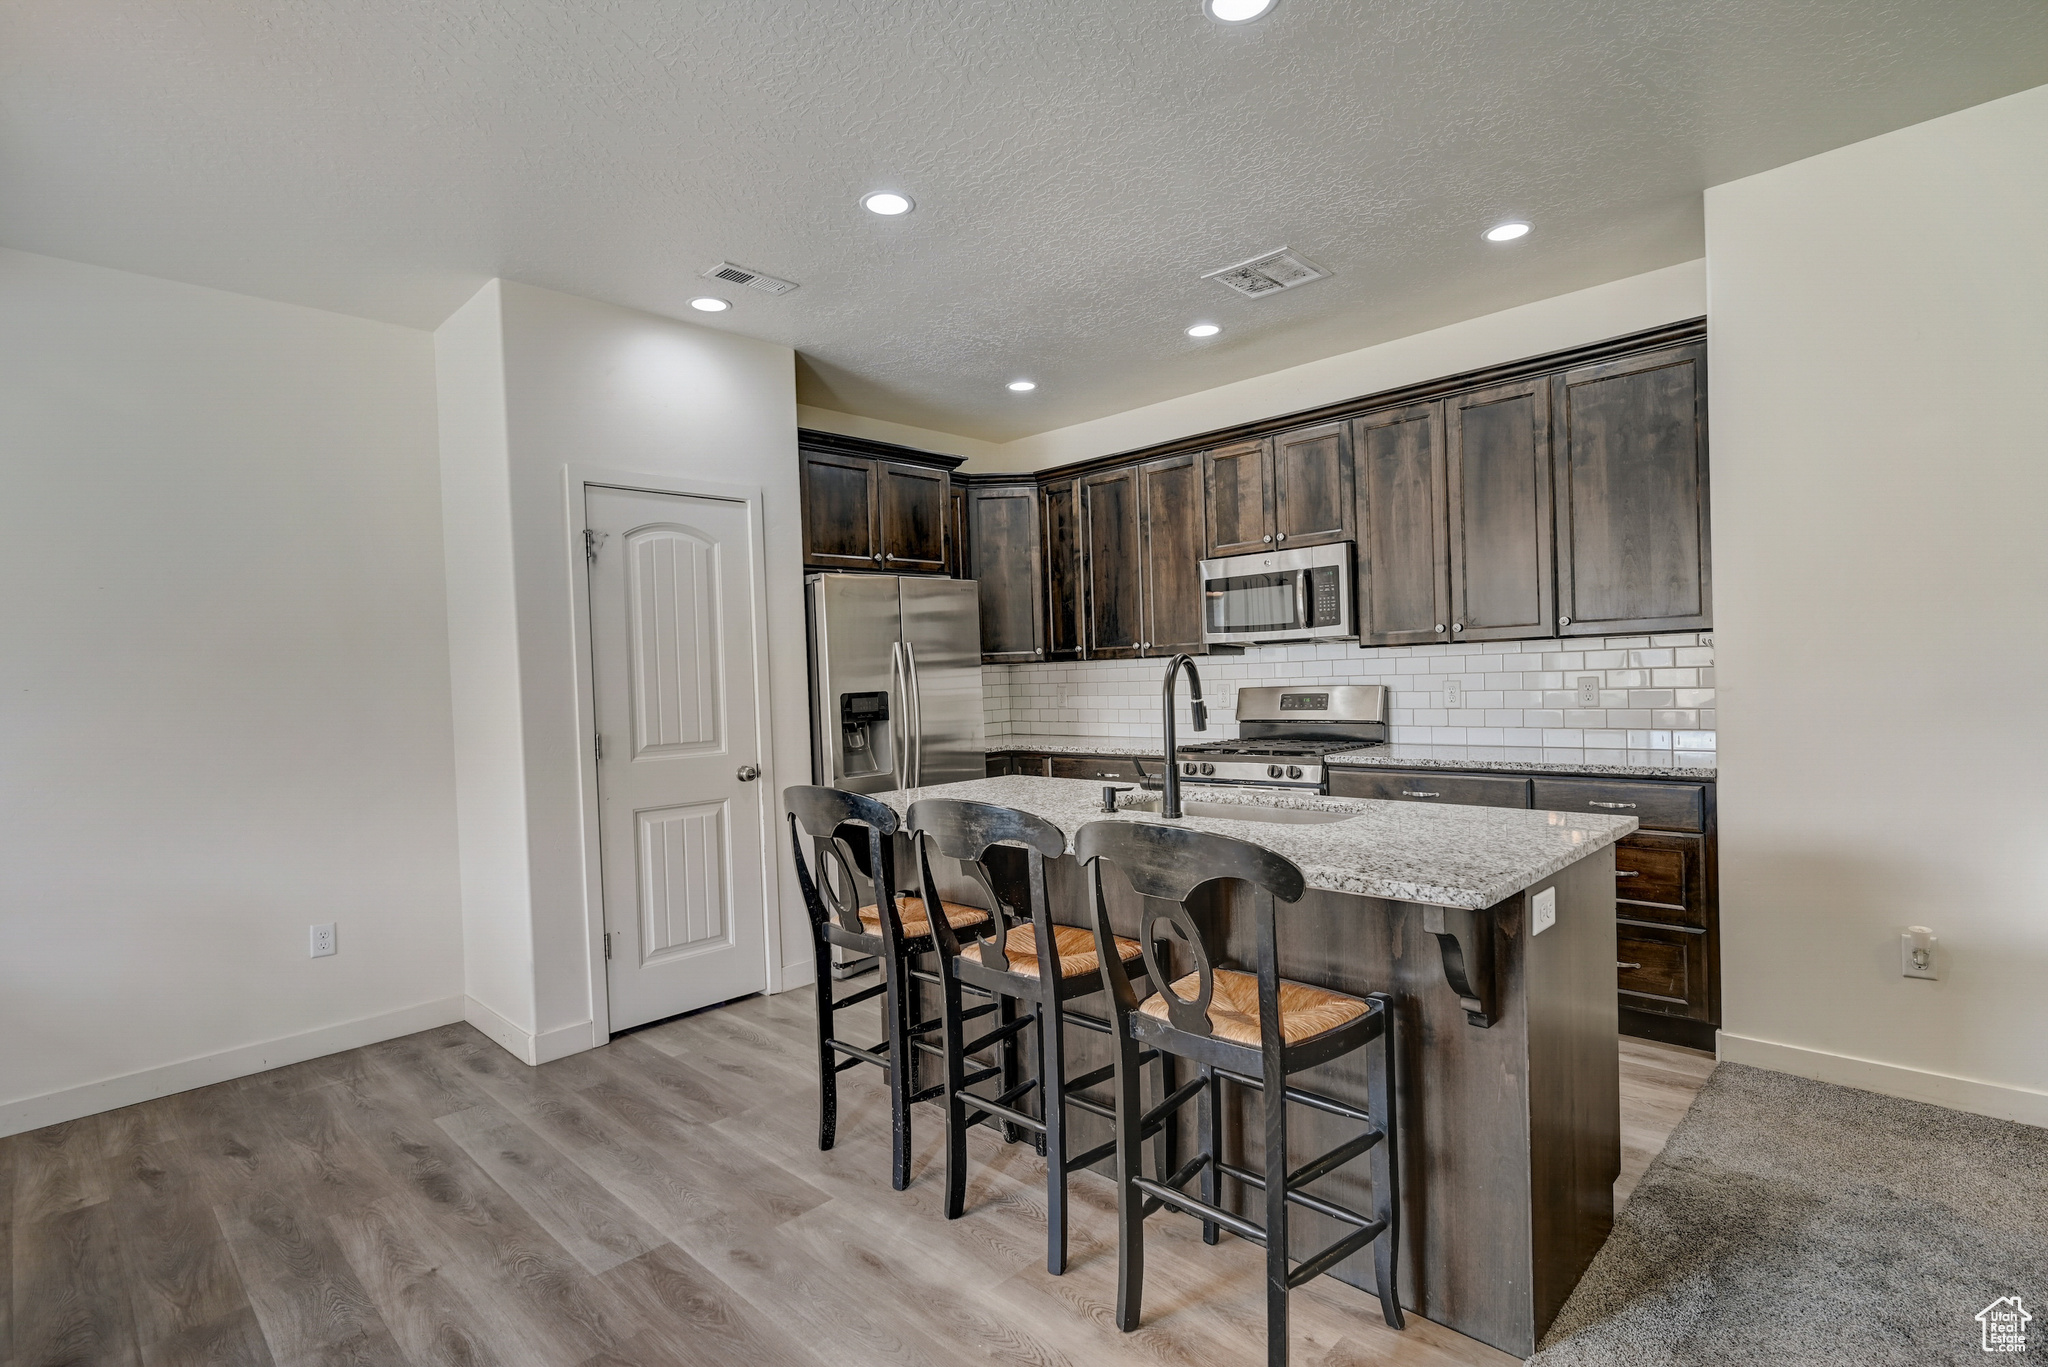 Kitchen with a breakfast bar, light stone counters, a center island with sink, stainless steel appliances, and light LVP flooring